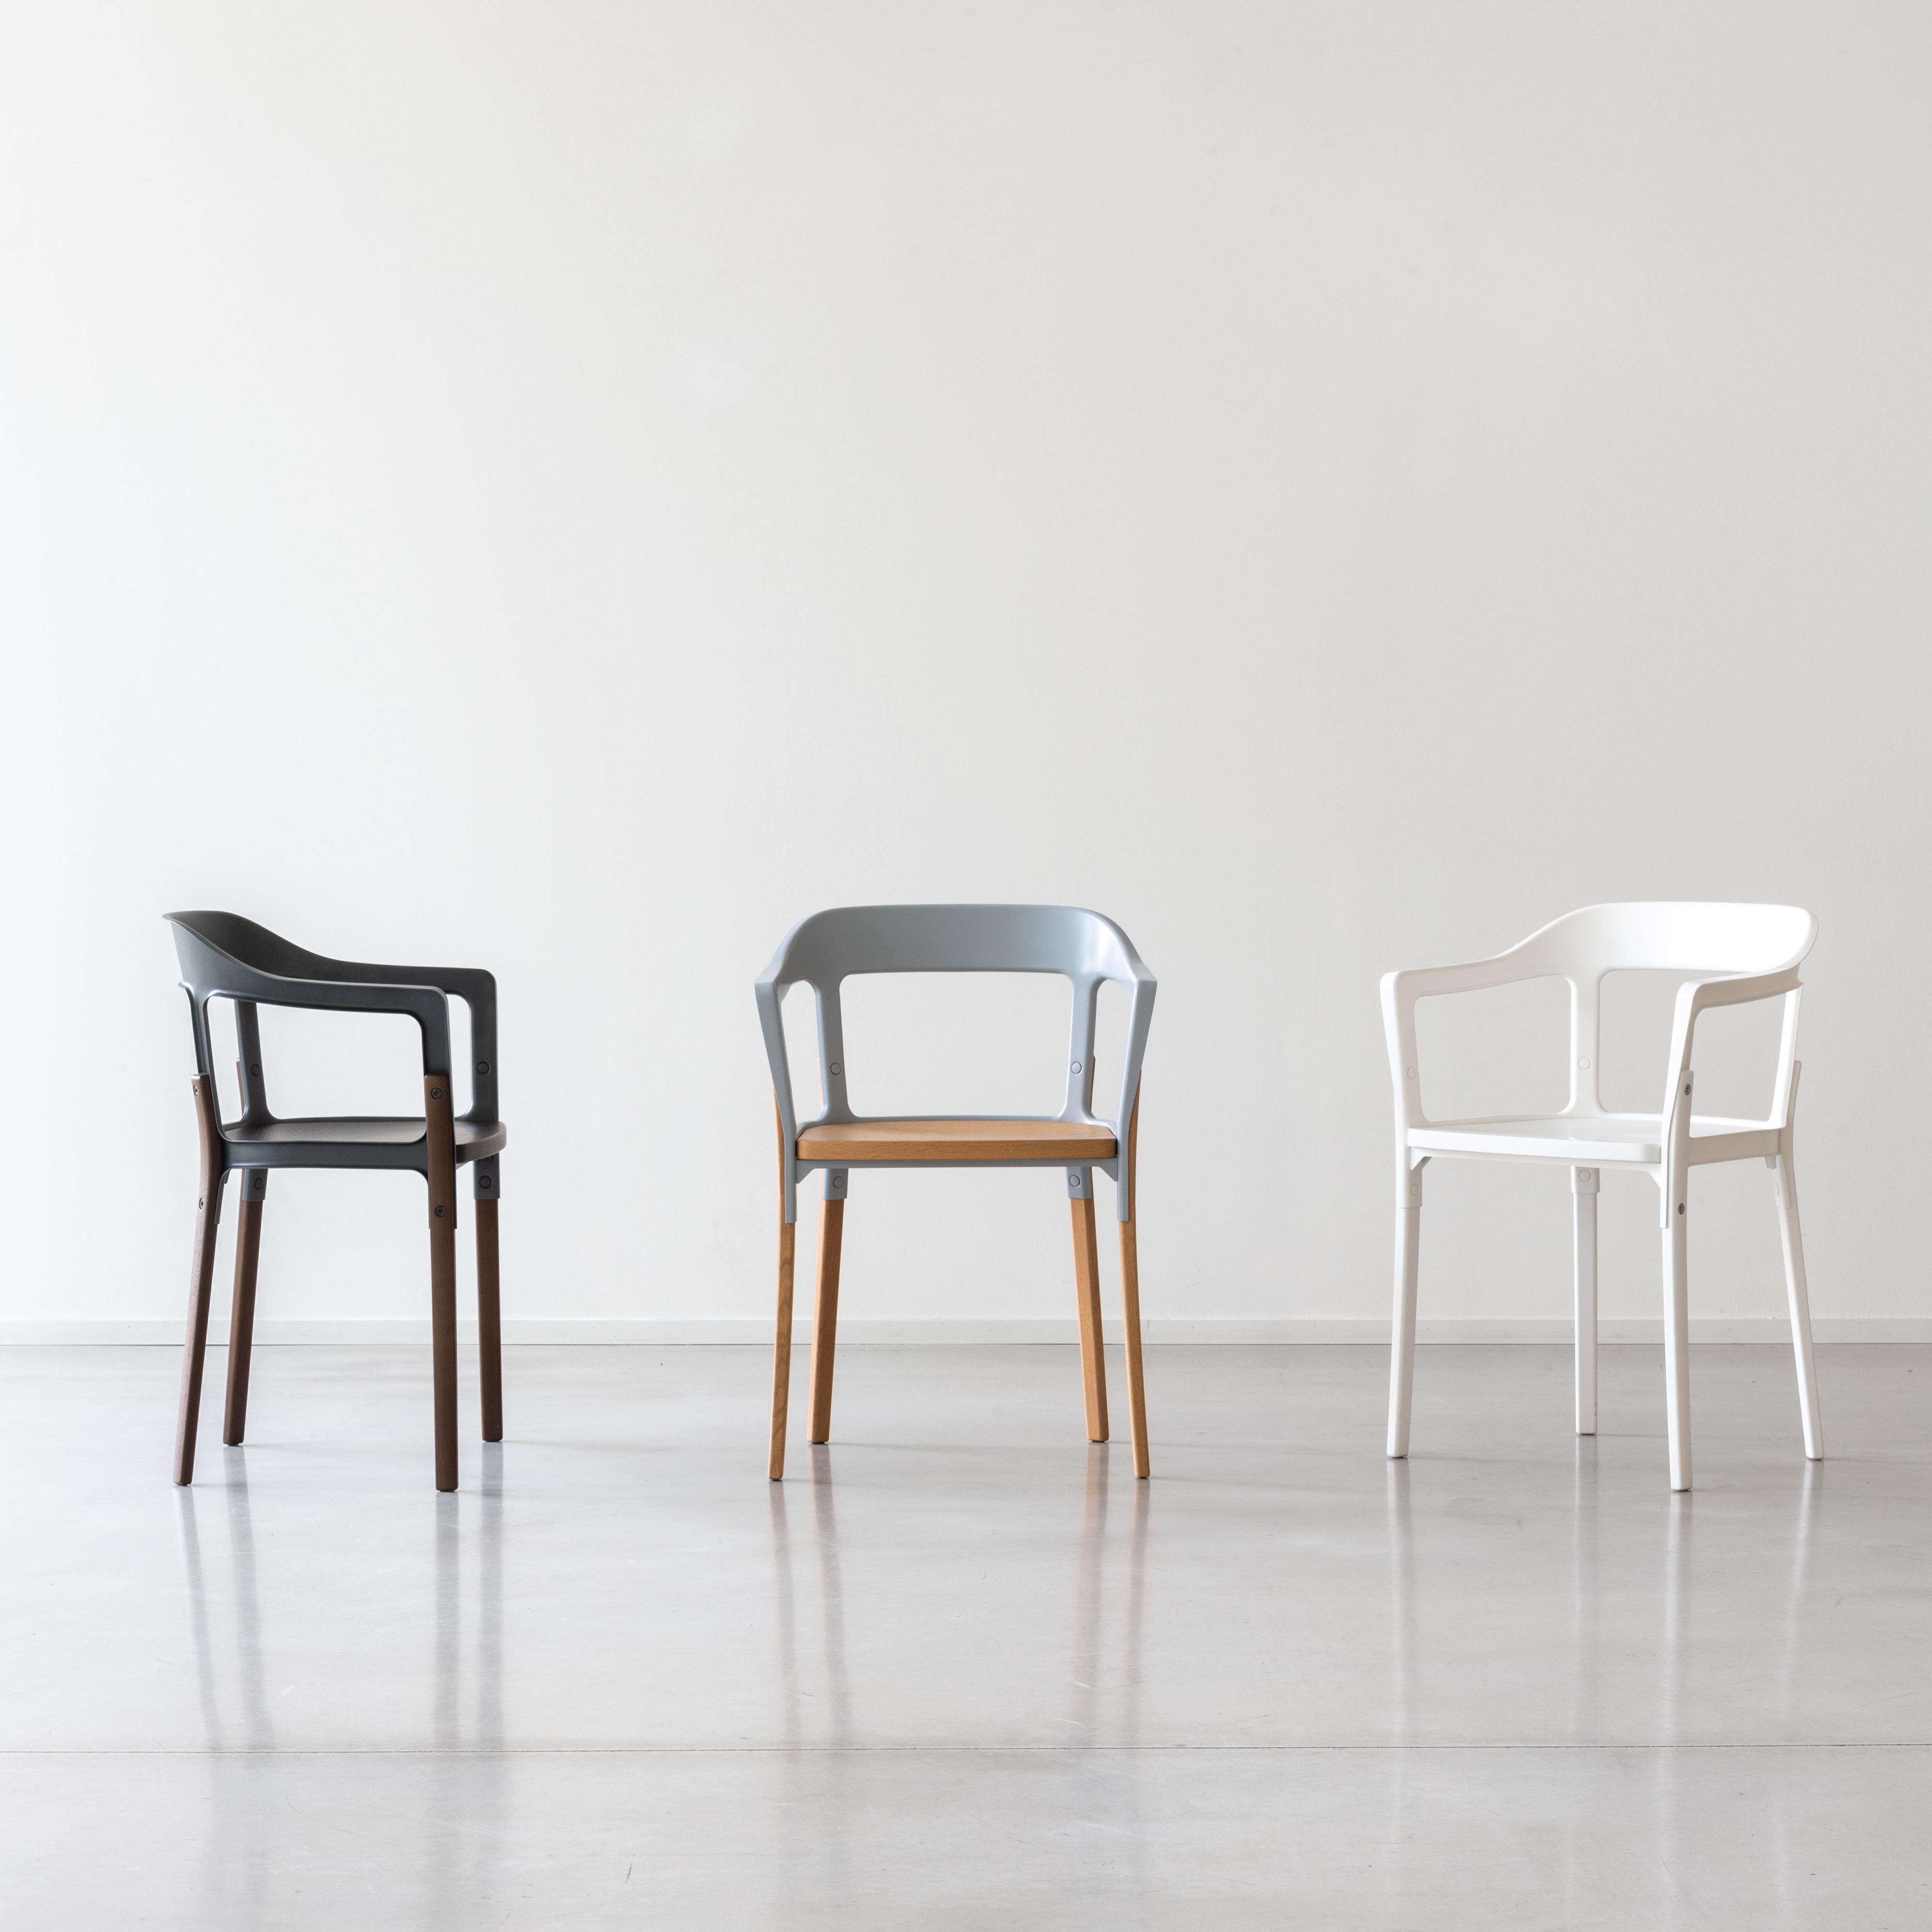 Wood Steelwood Chair in Natural/White by Ronan & Erwan Boroullec for MAGIS For Sale